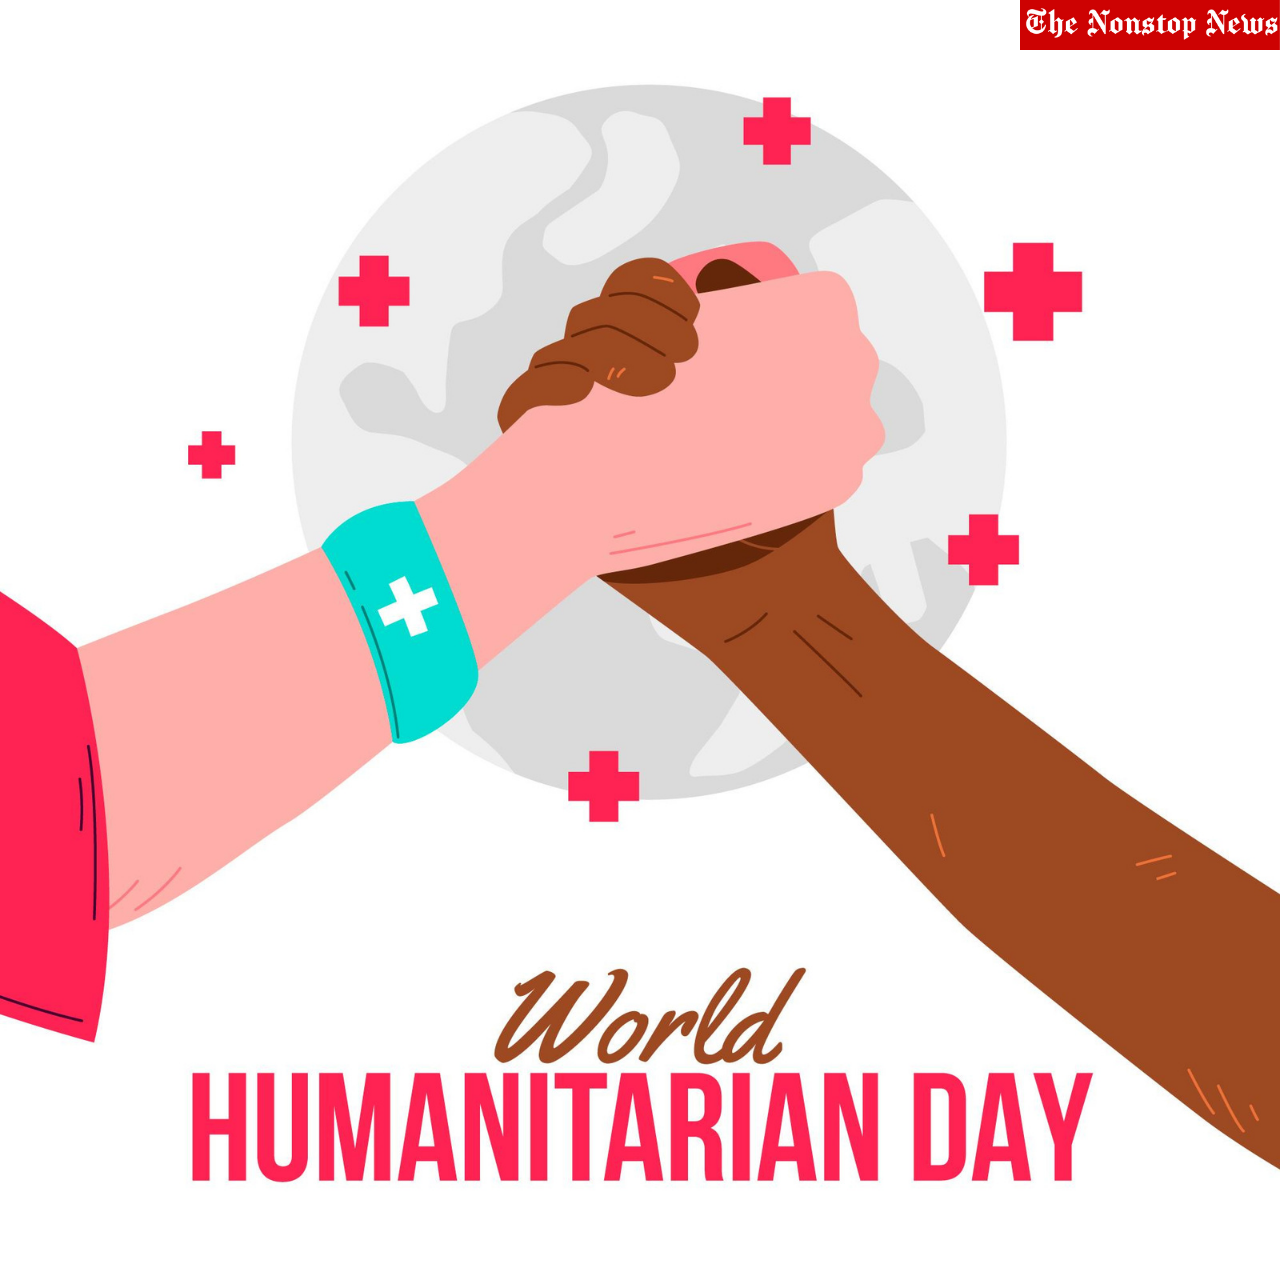 World Humanitarian Day 2021 Theme, Quotes, Poster, Messages, and Images to pay tribute to humanitarian workers killed and injured in the course of their work